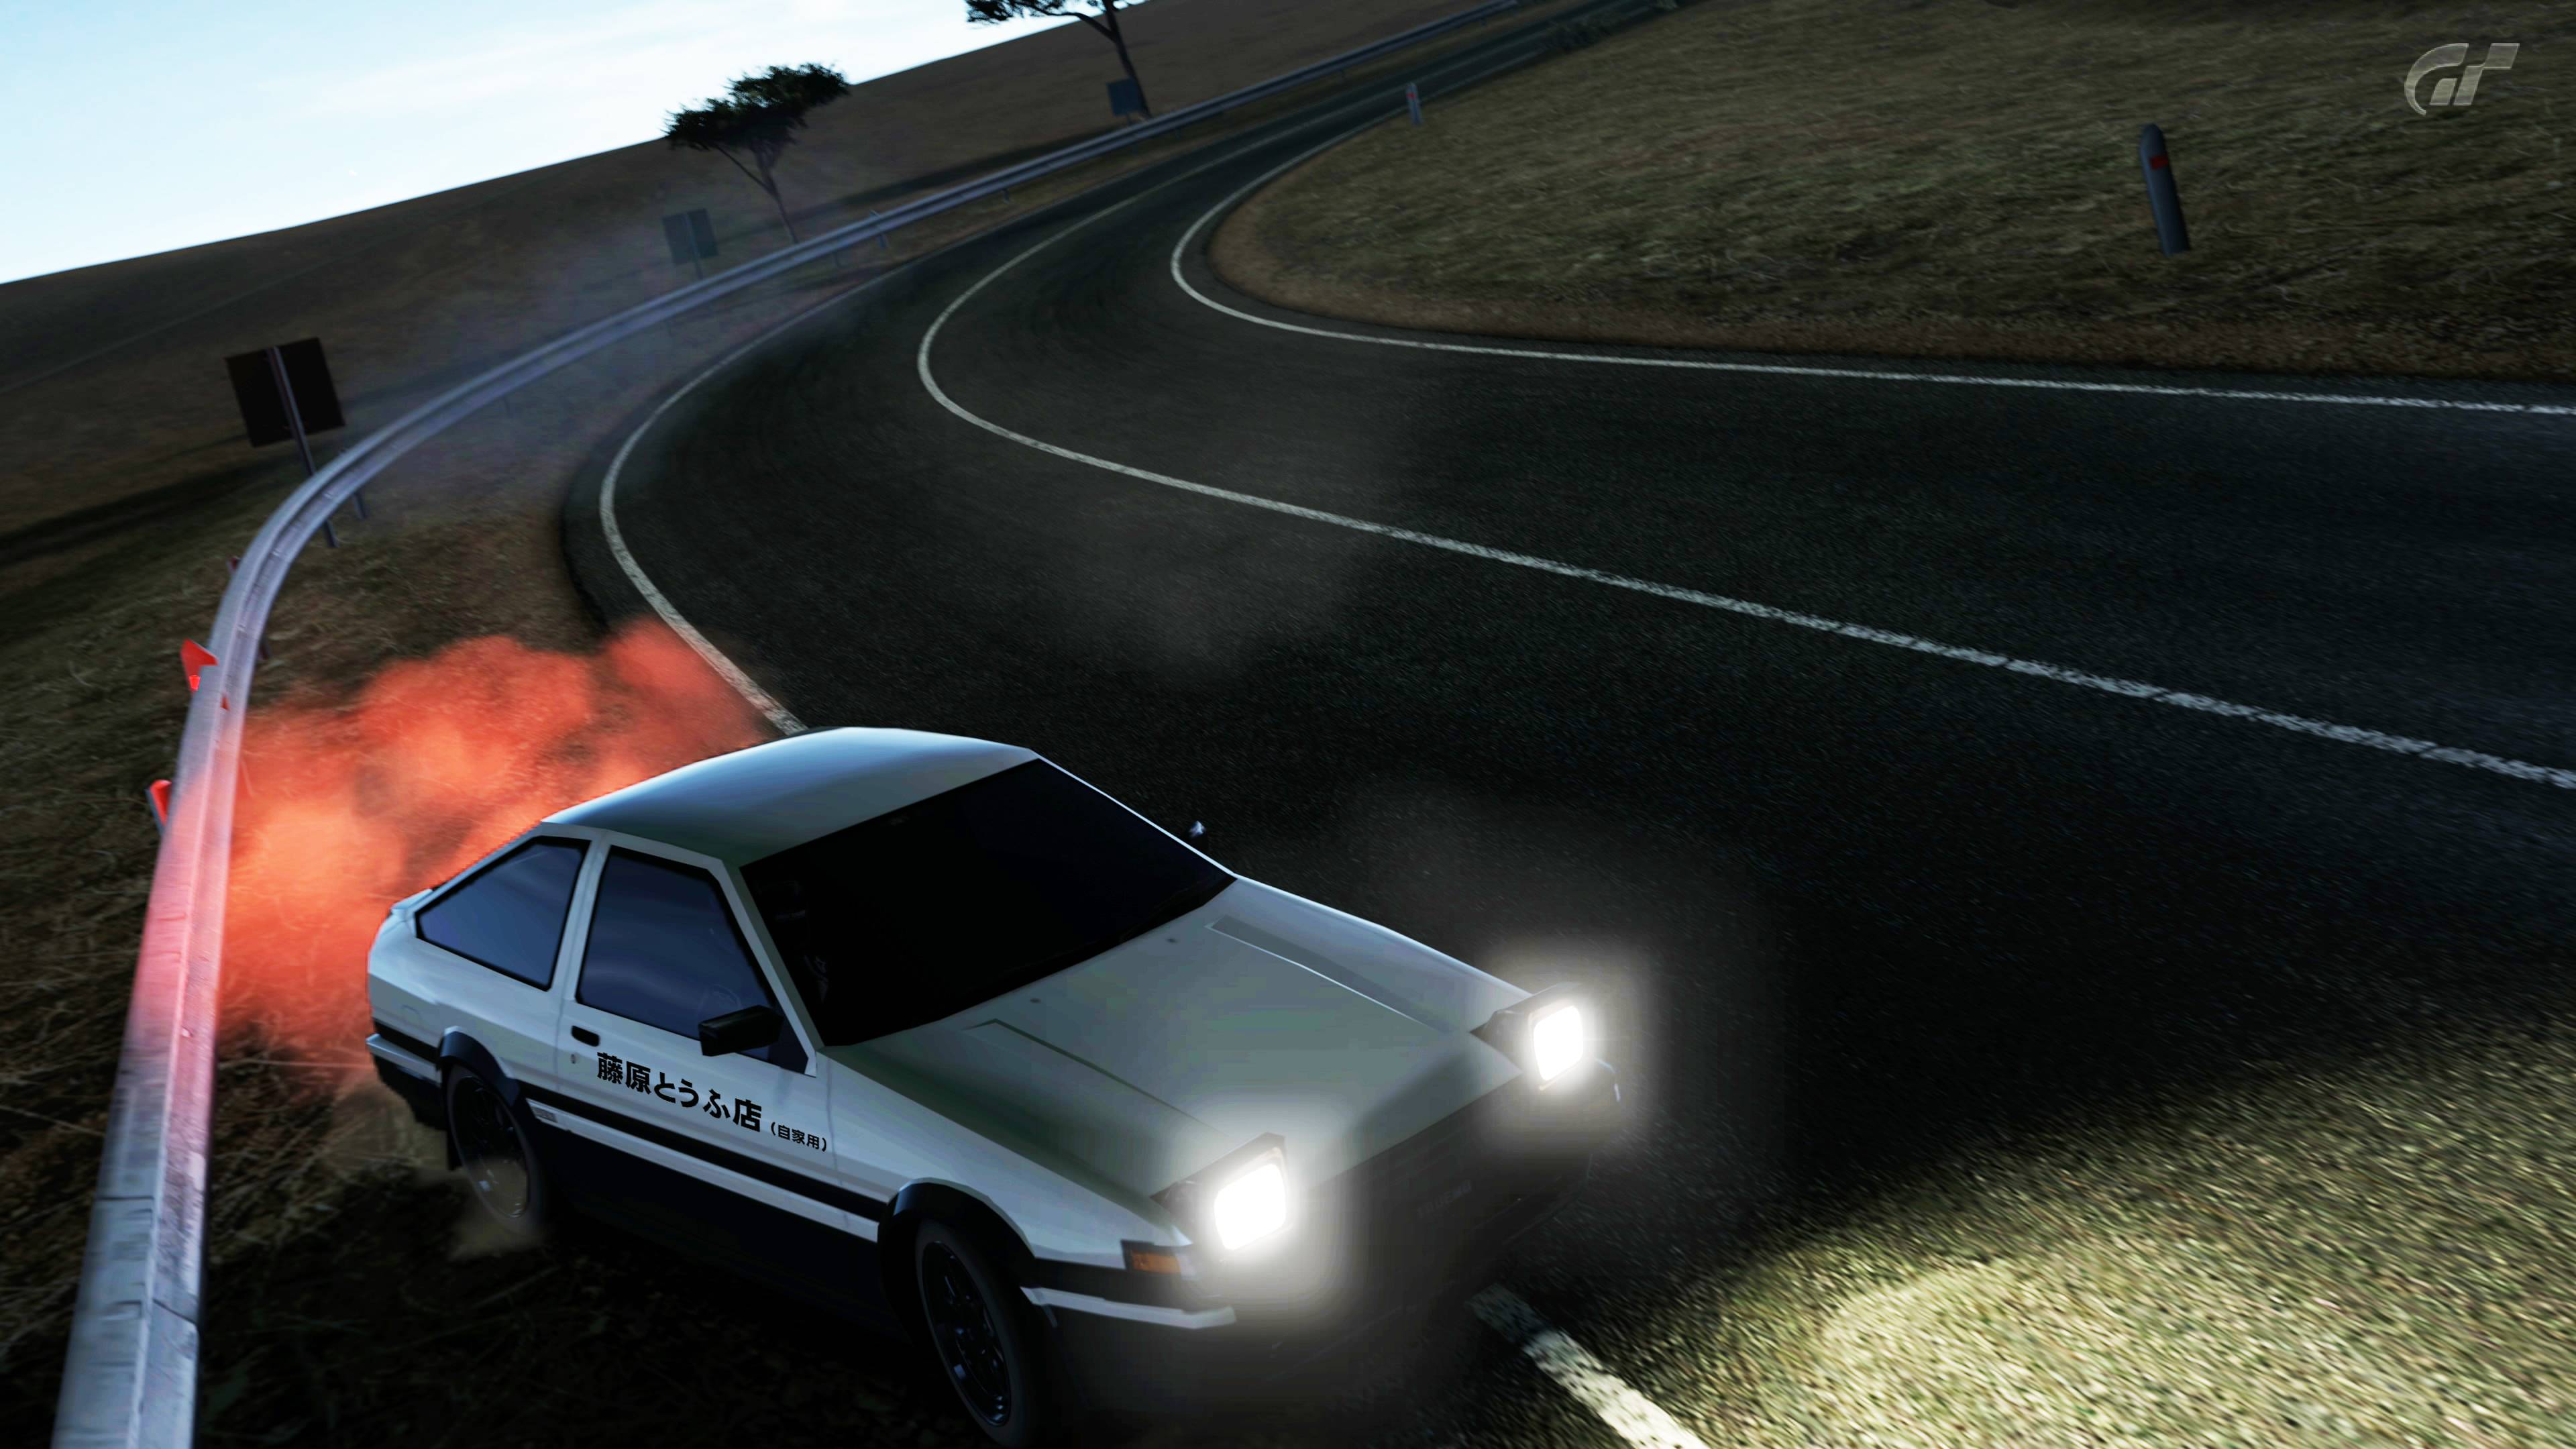 AE86 Initial D style